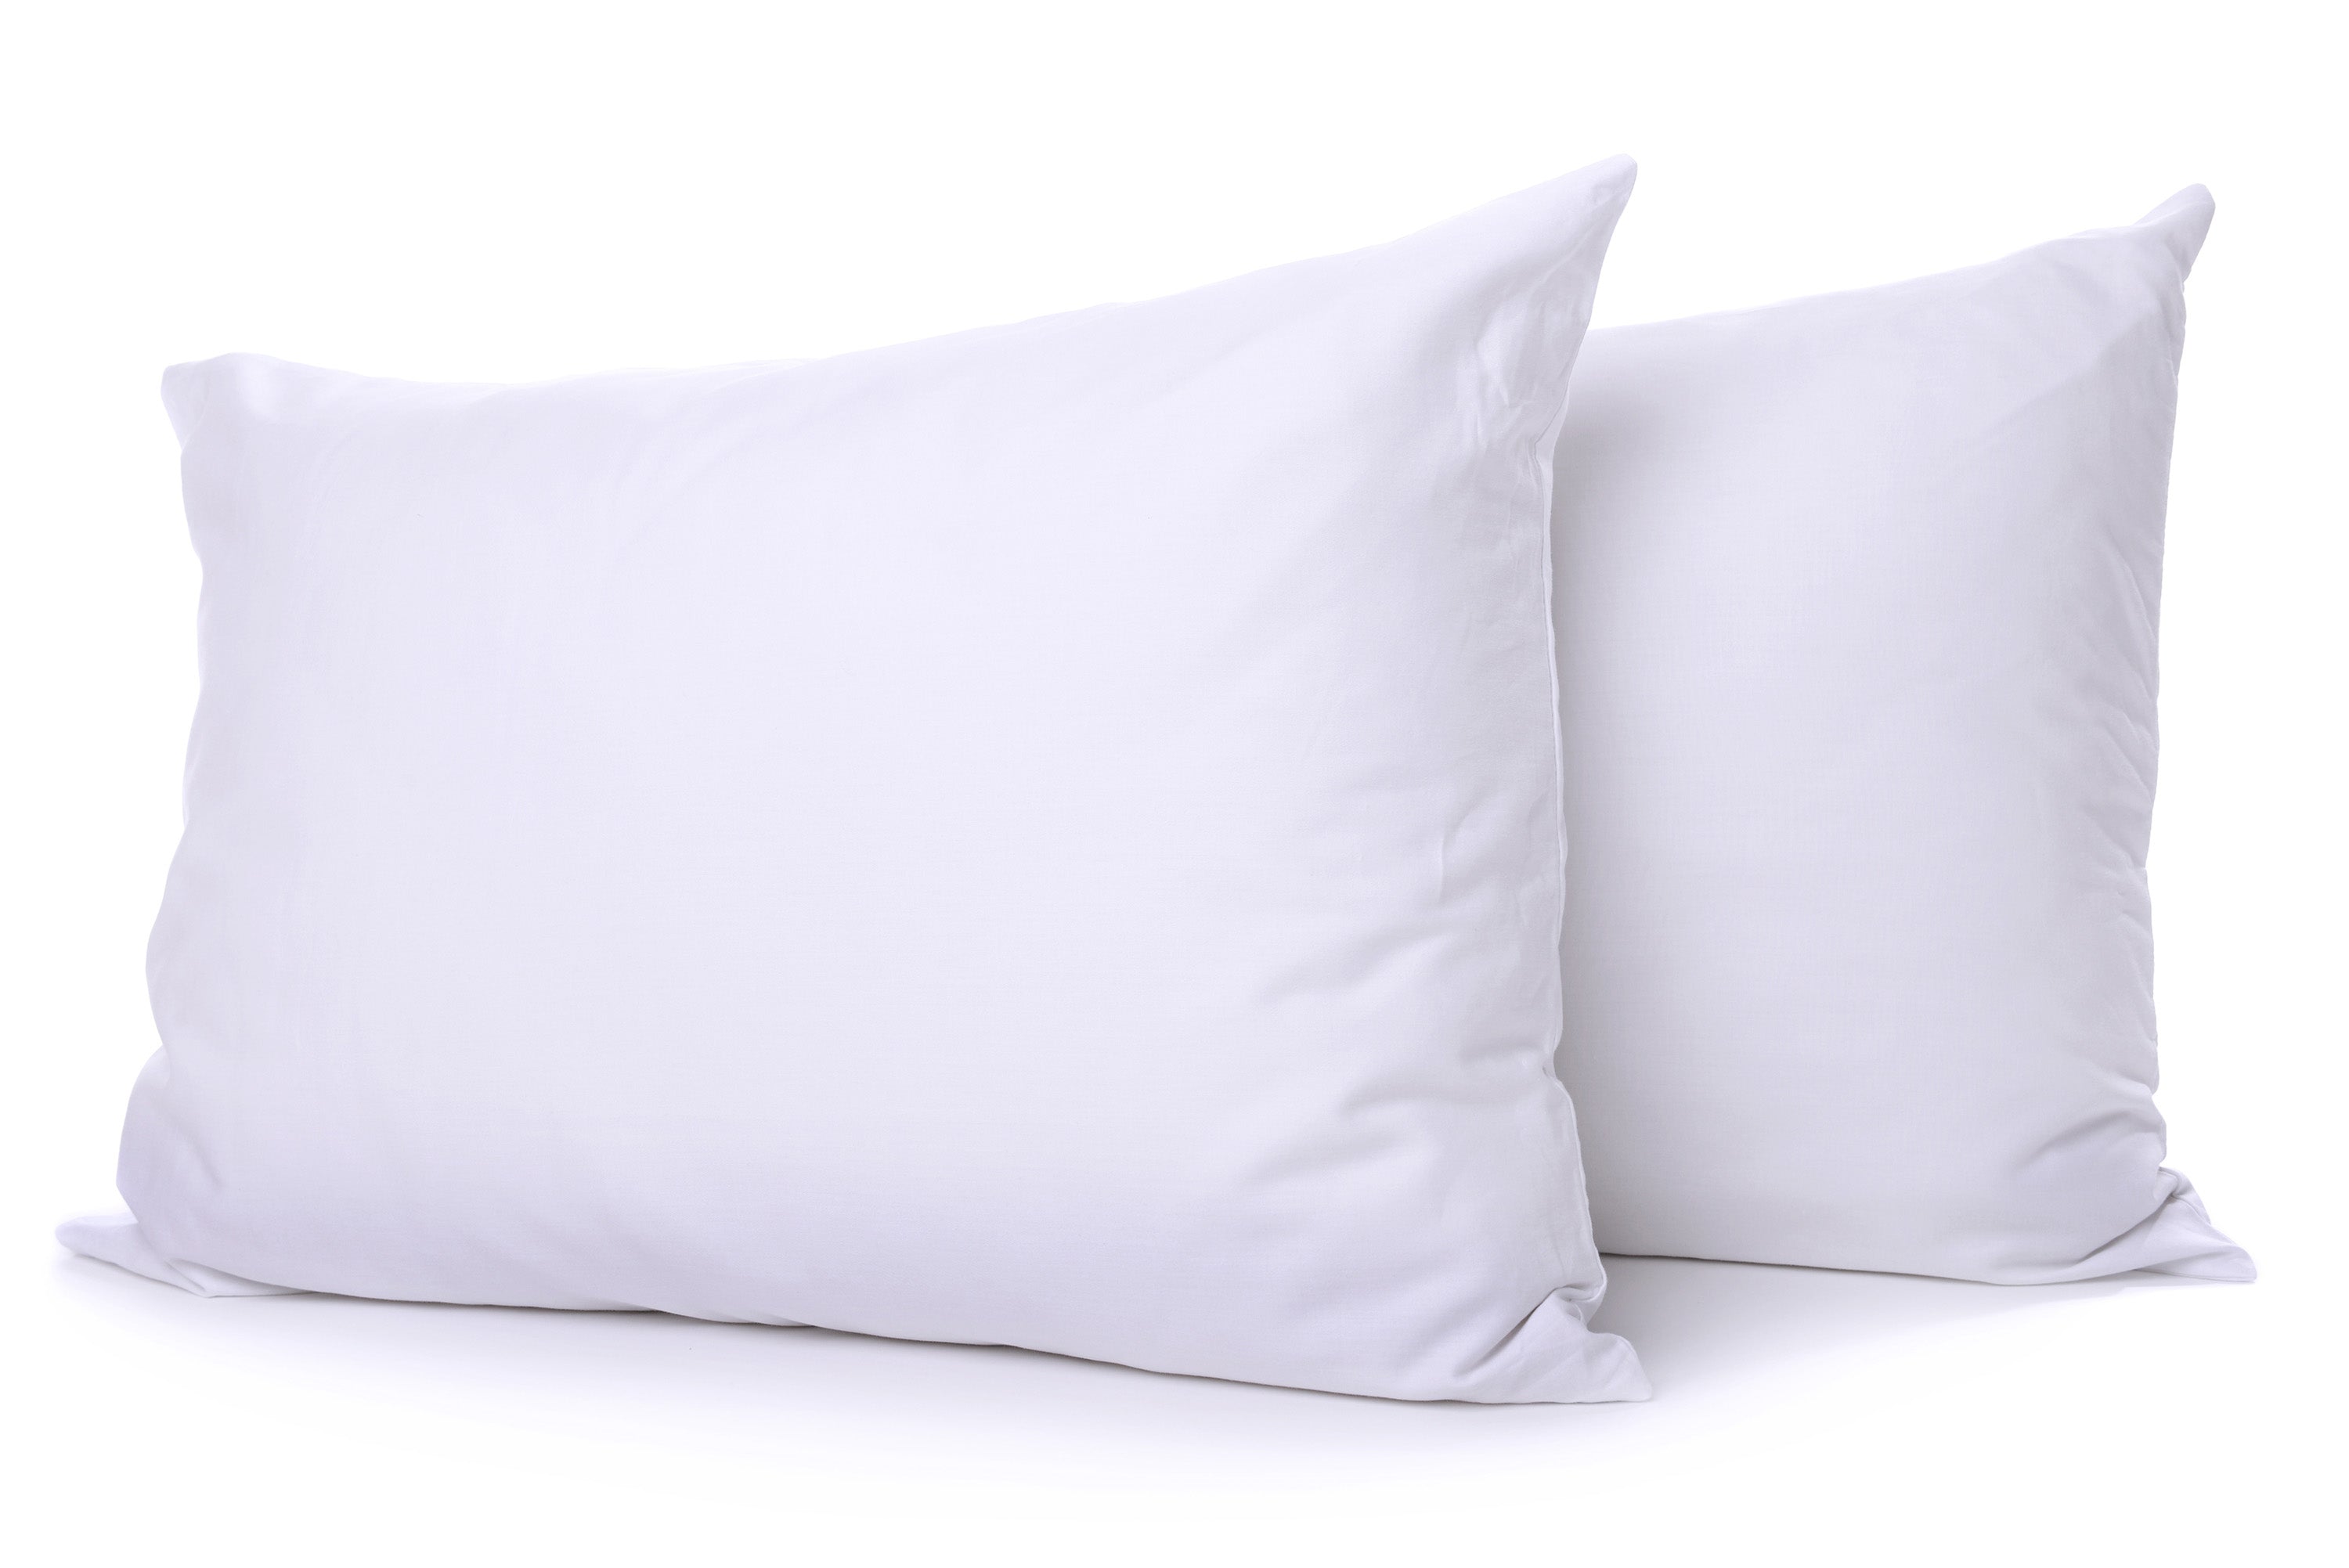 Down Etc. Diamond Support Feather & Down Pillow